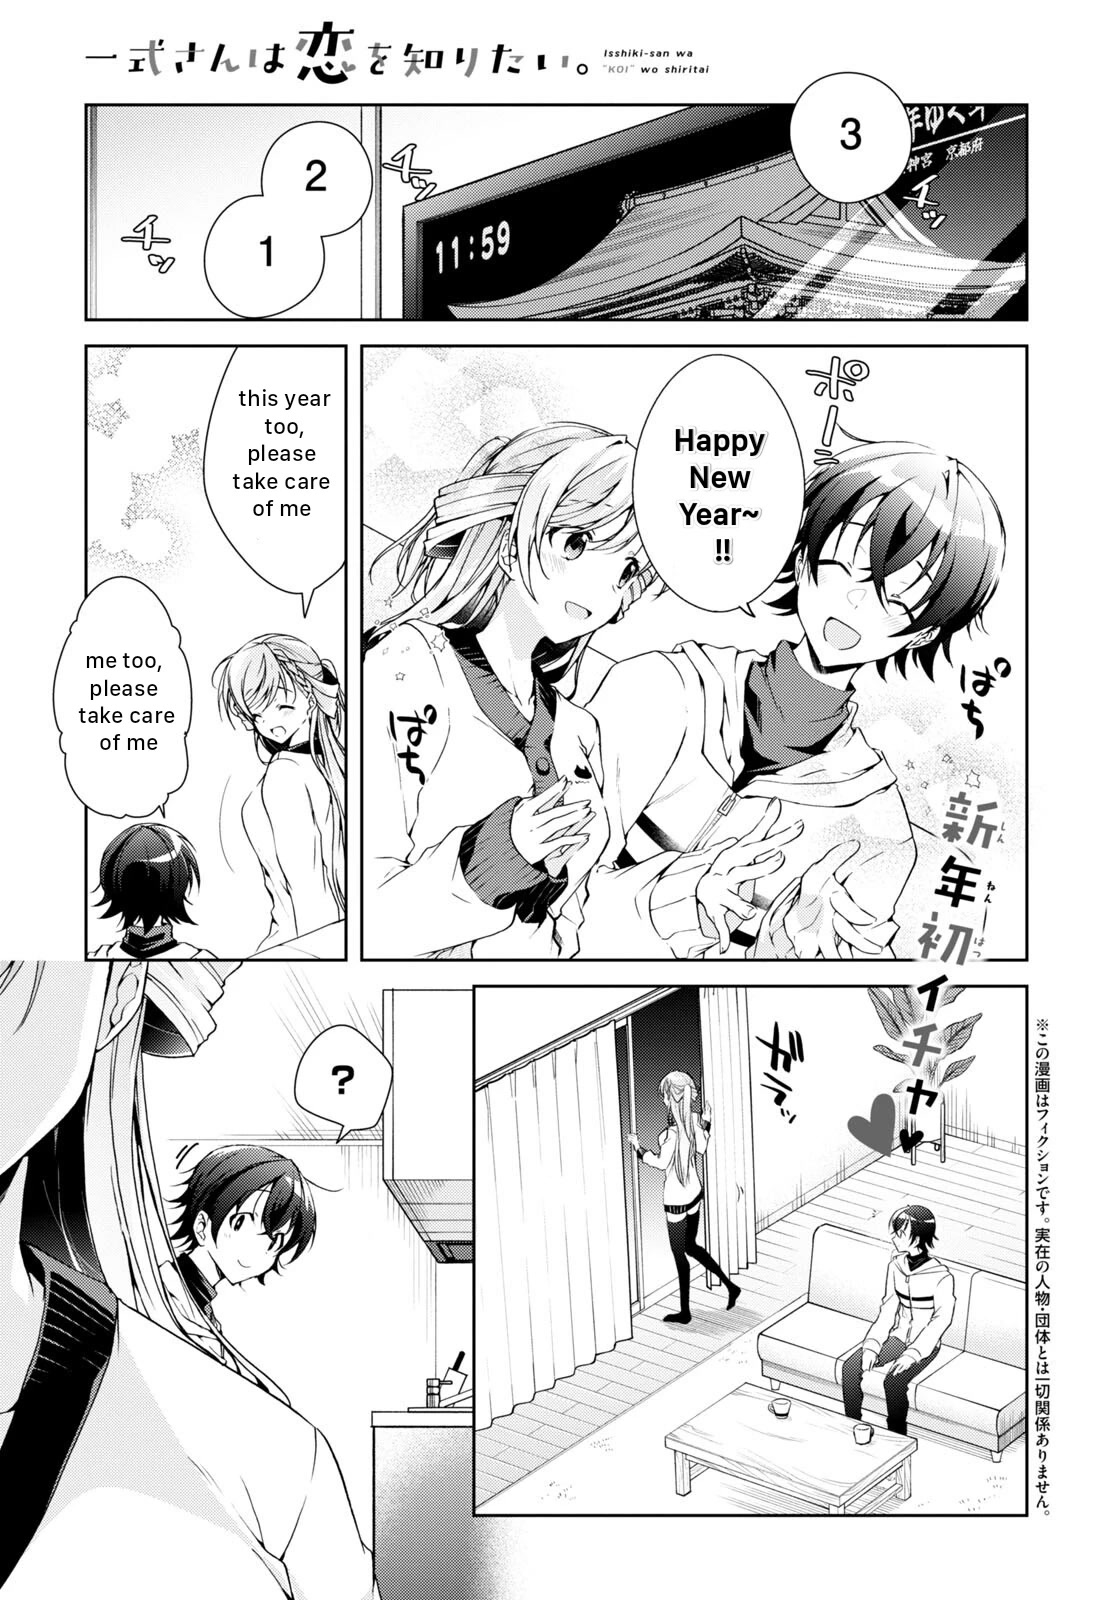 Isshiki-san Wants to Know About Love. - chapter 23 - #1